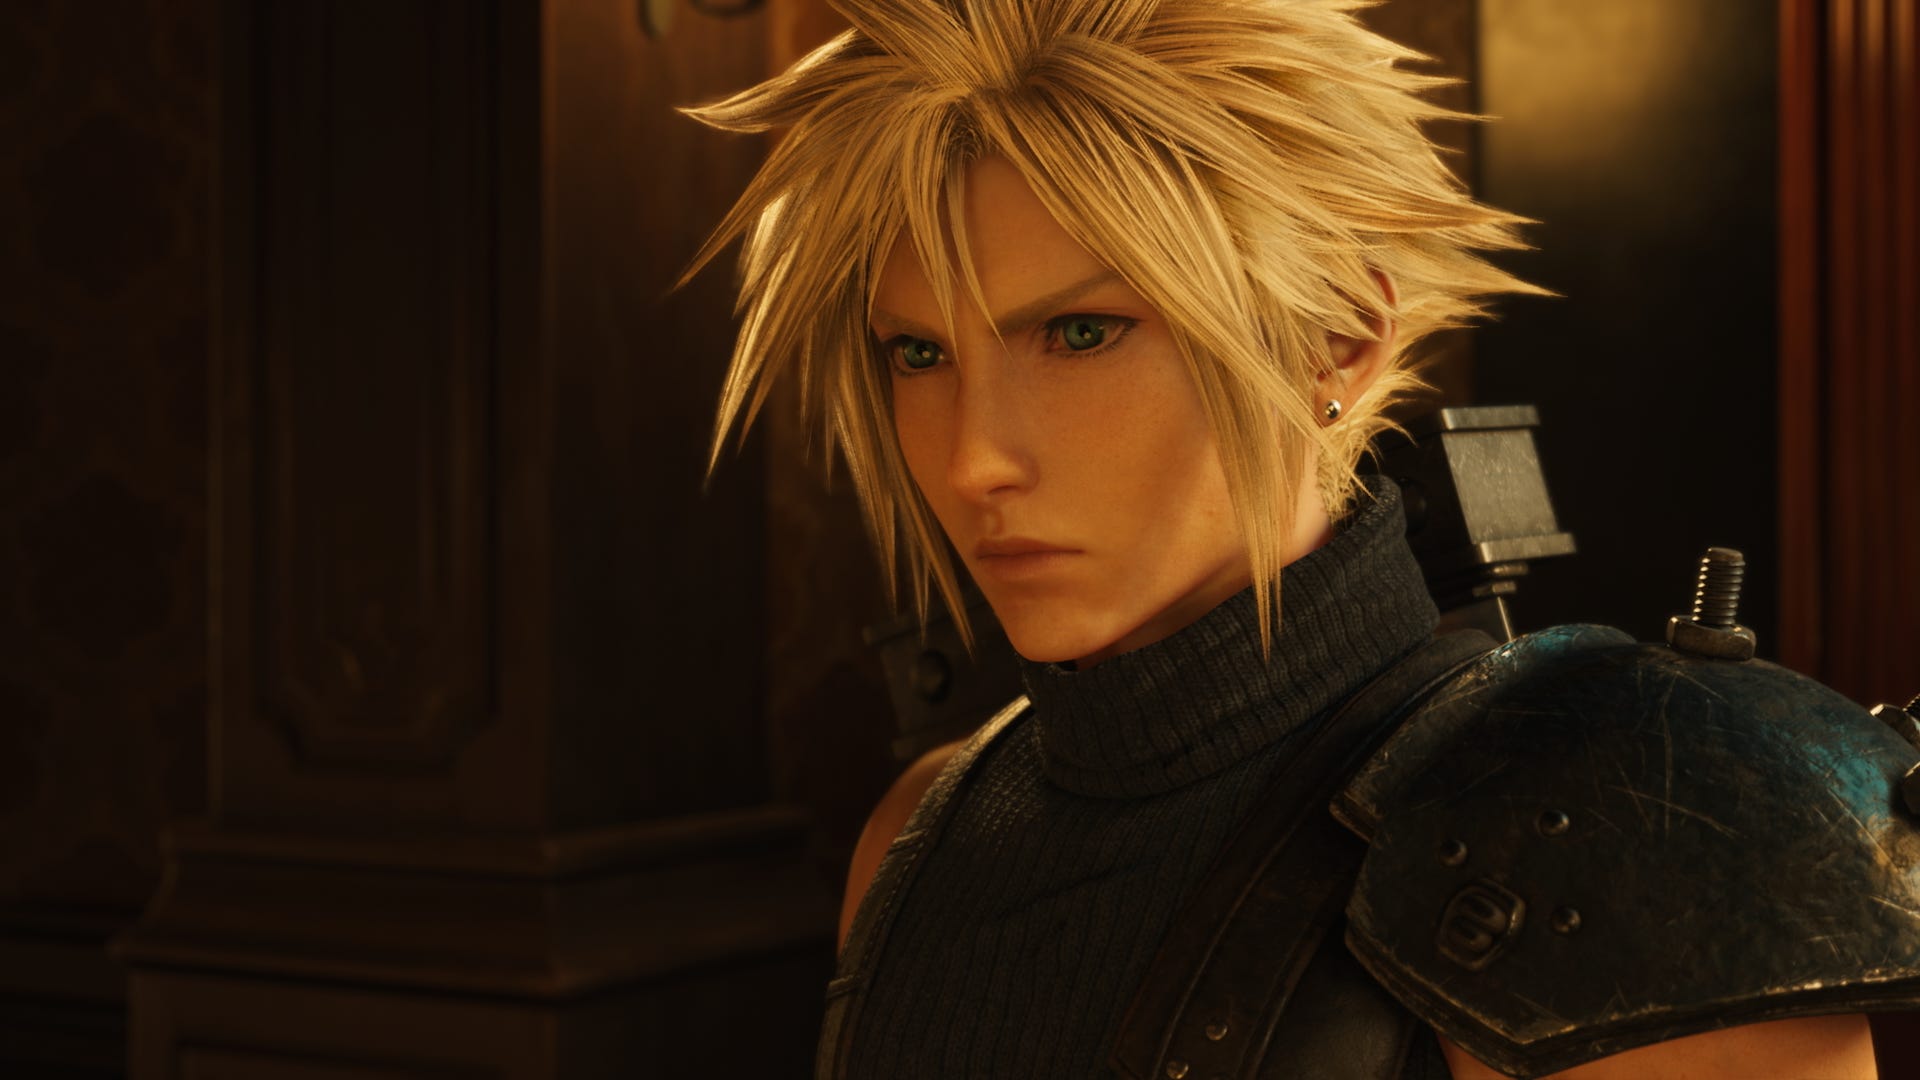 Final Fantasy 7 Rebirth's leads have some conflicting opinions on the term JRPG